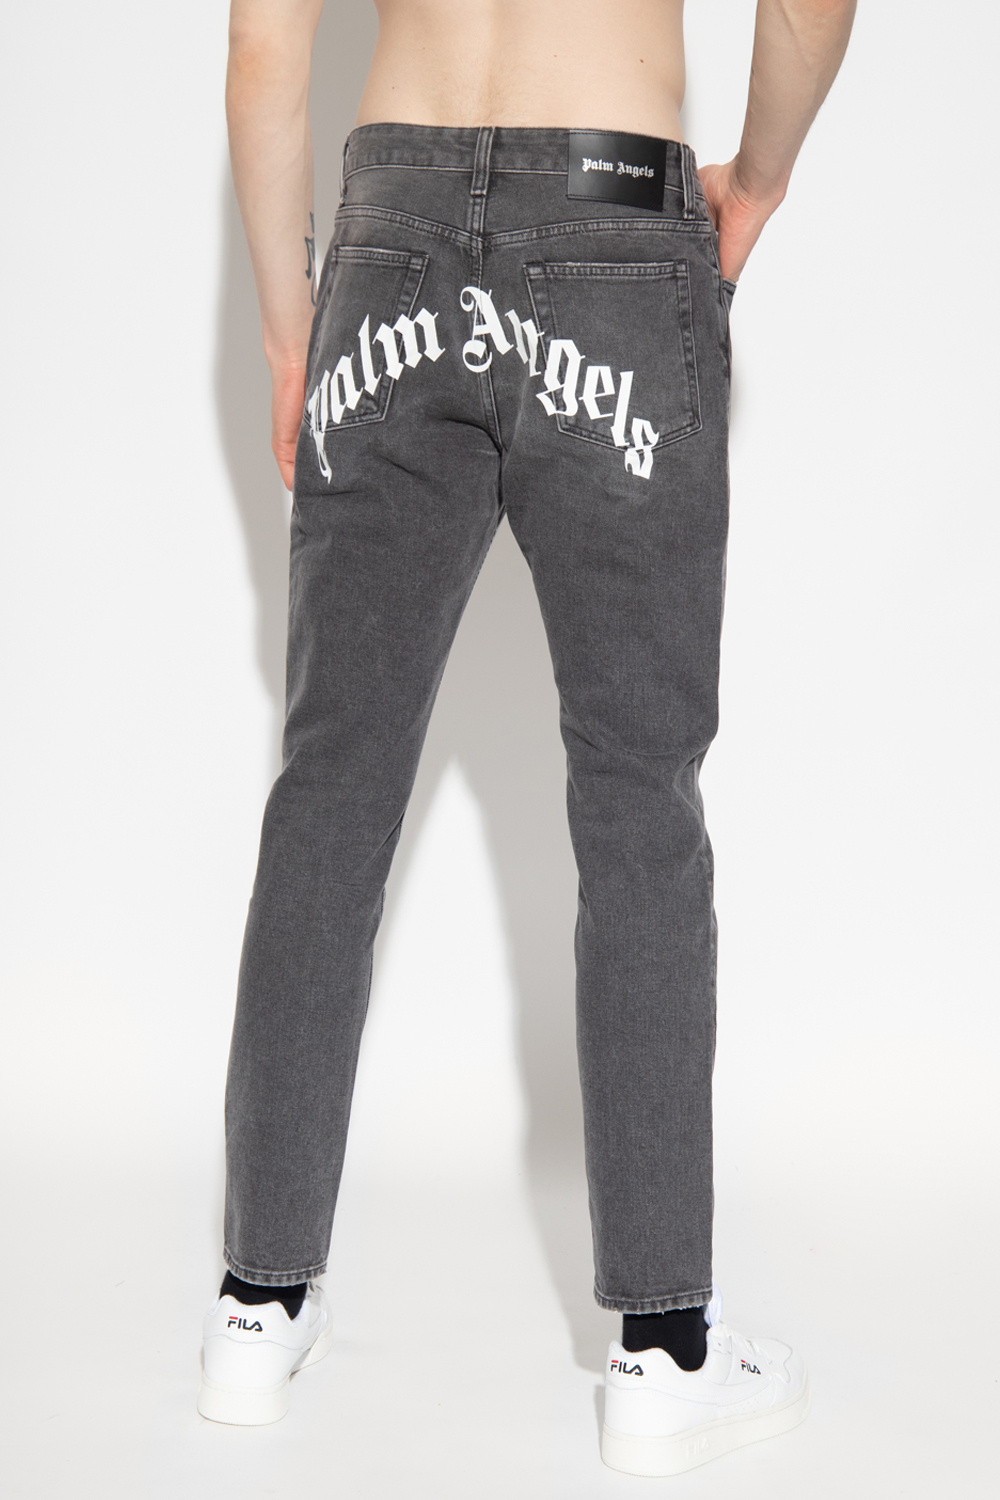 Palm Angels Jeans with logo, Men's Clothing